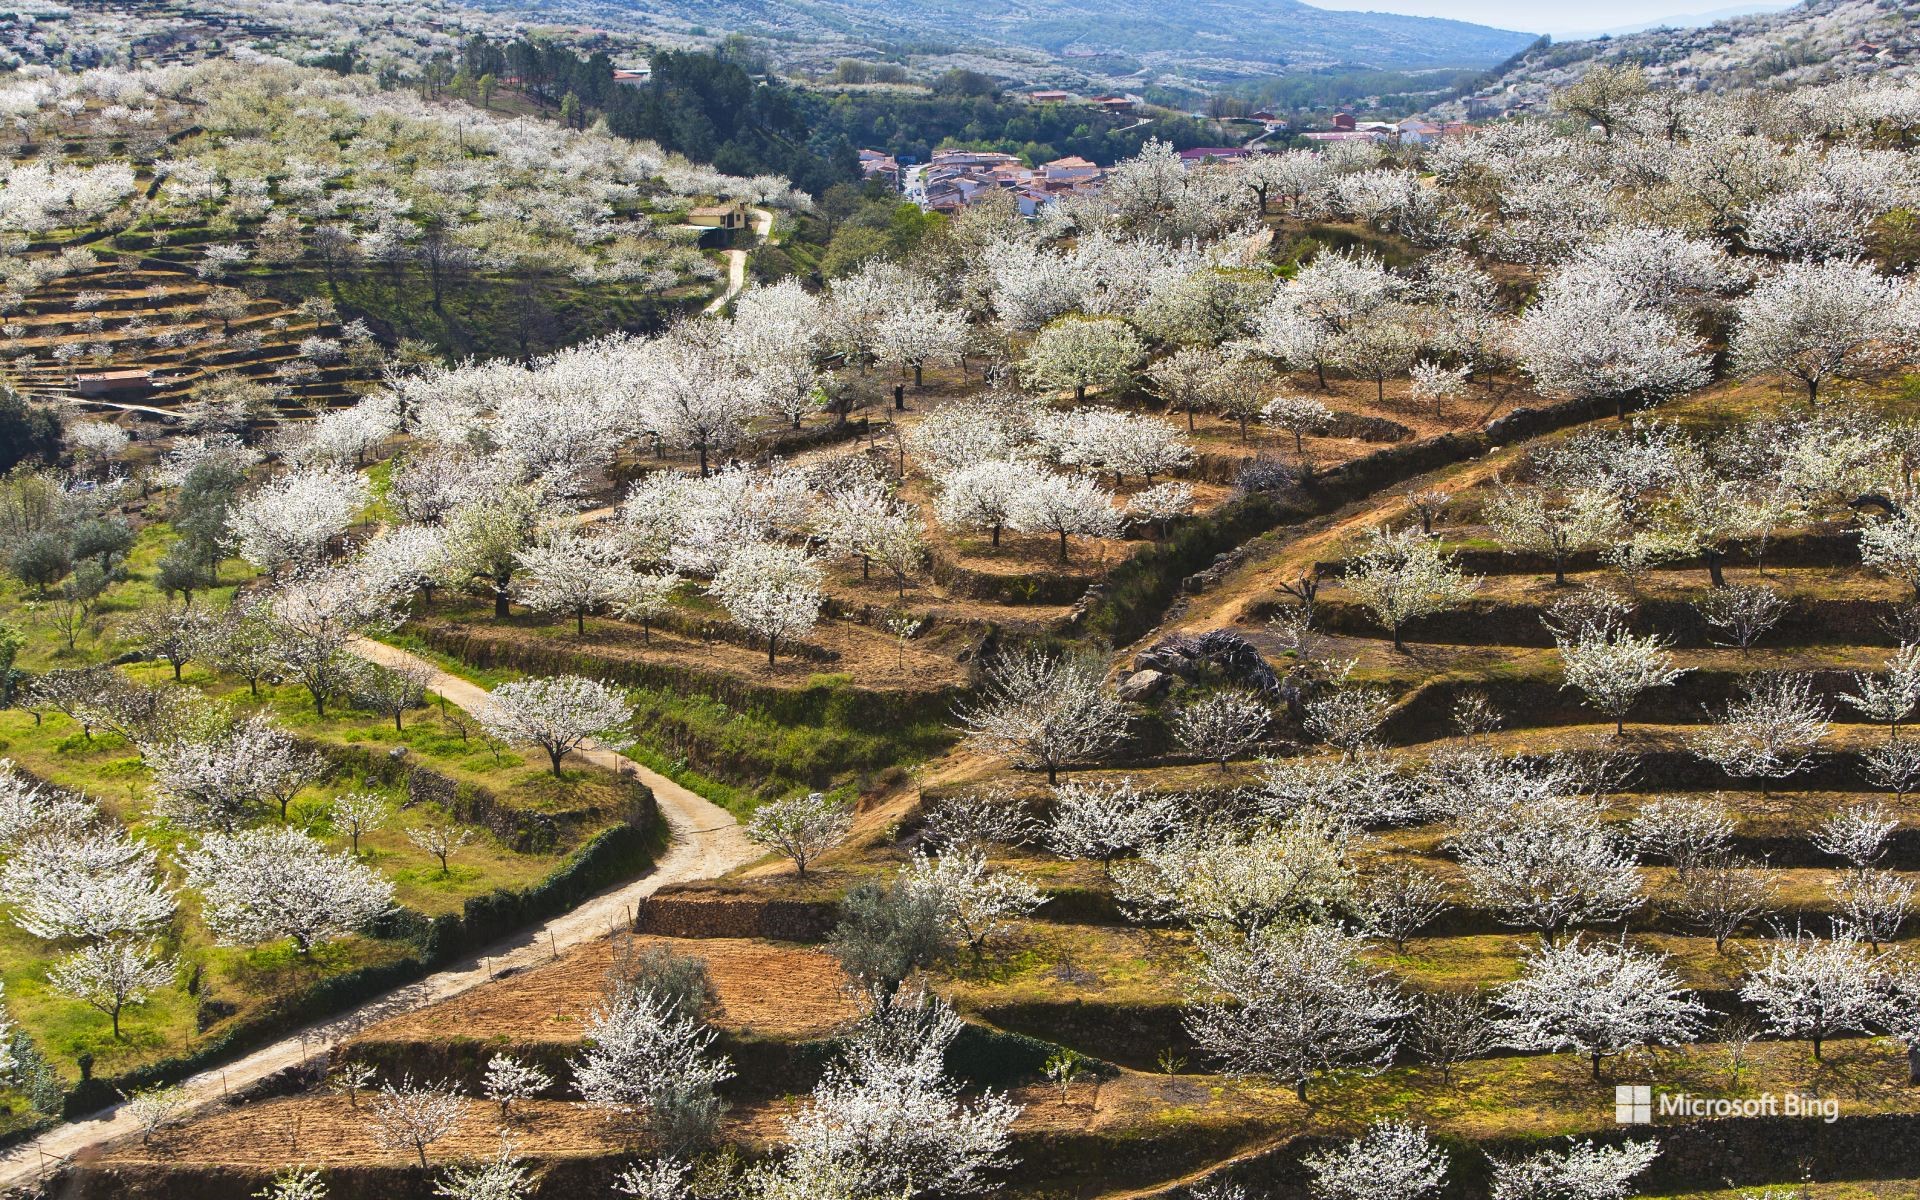 Cherry blossoms in Valle del Jerte, Cáceres province, Extremadura, Spain